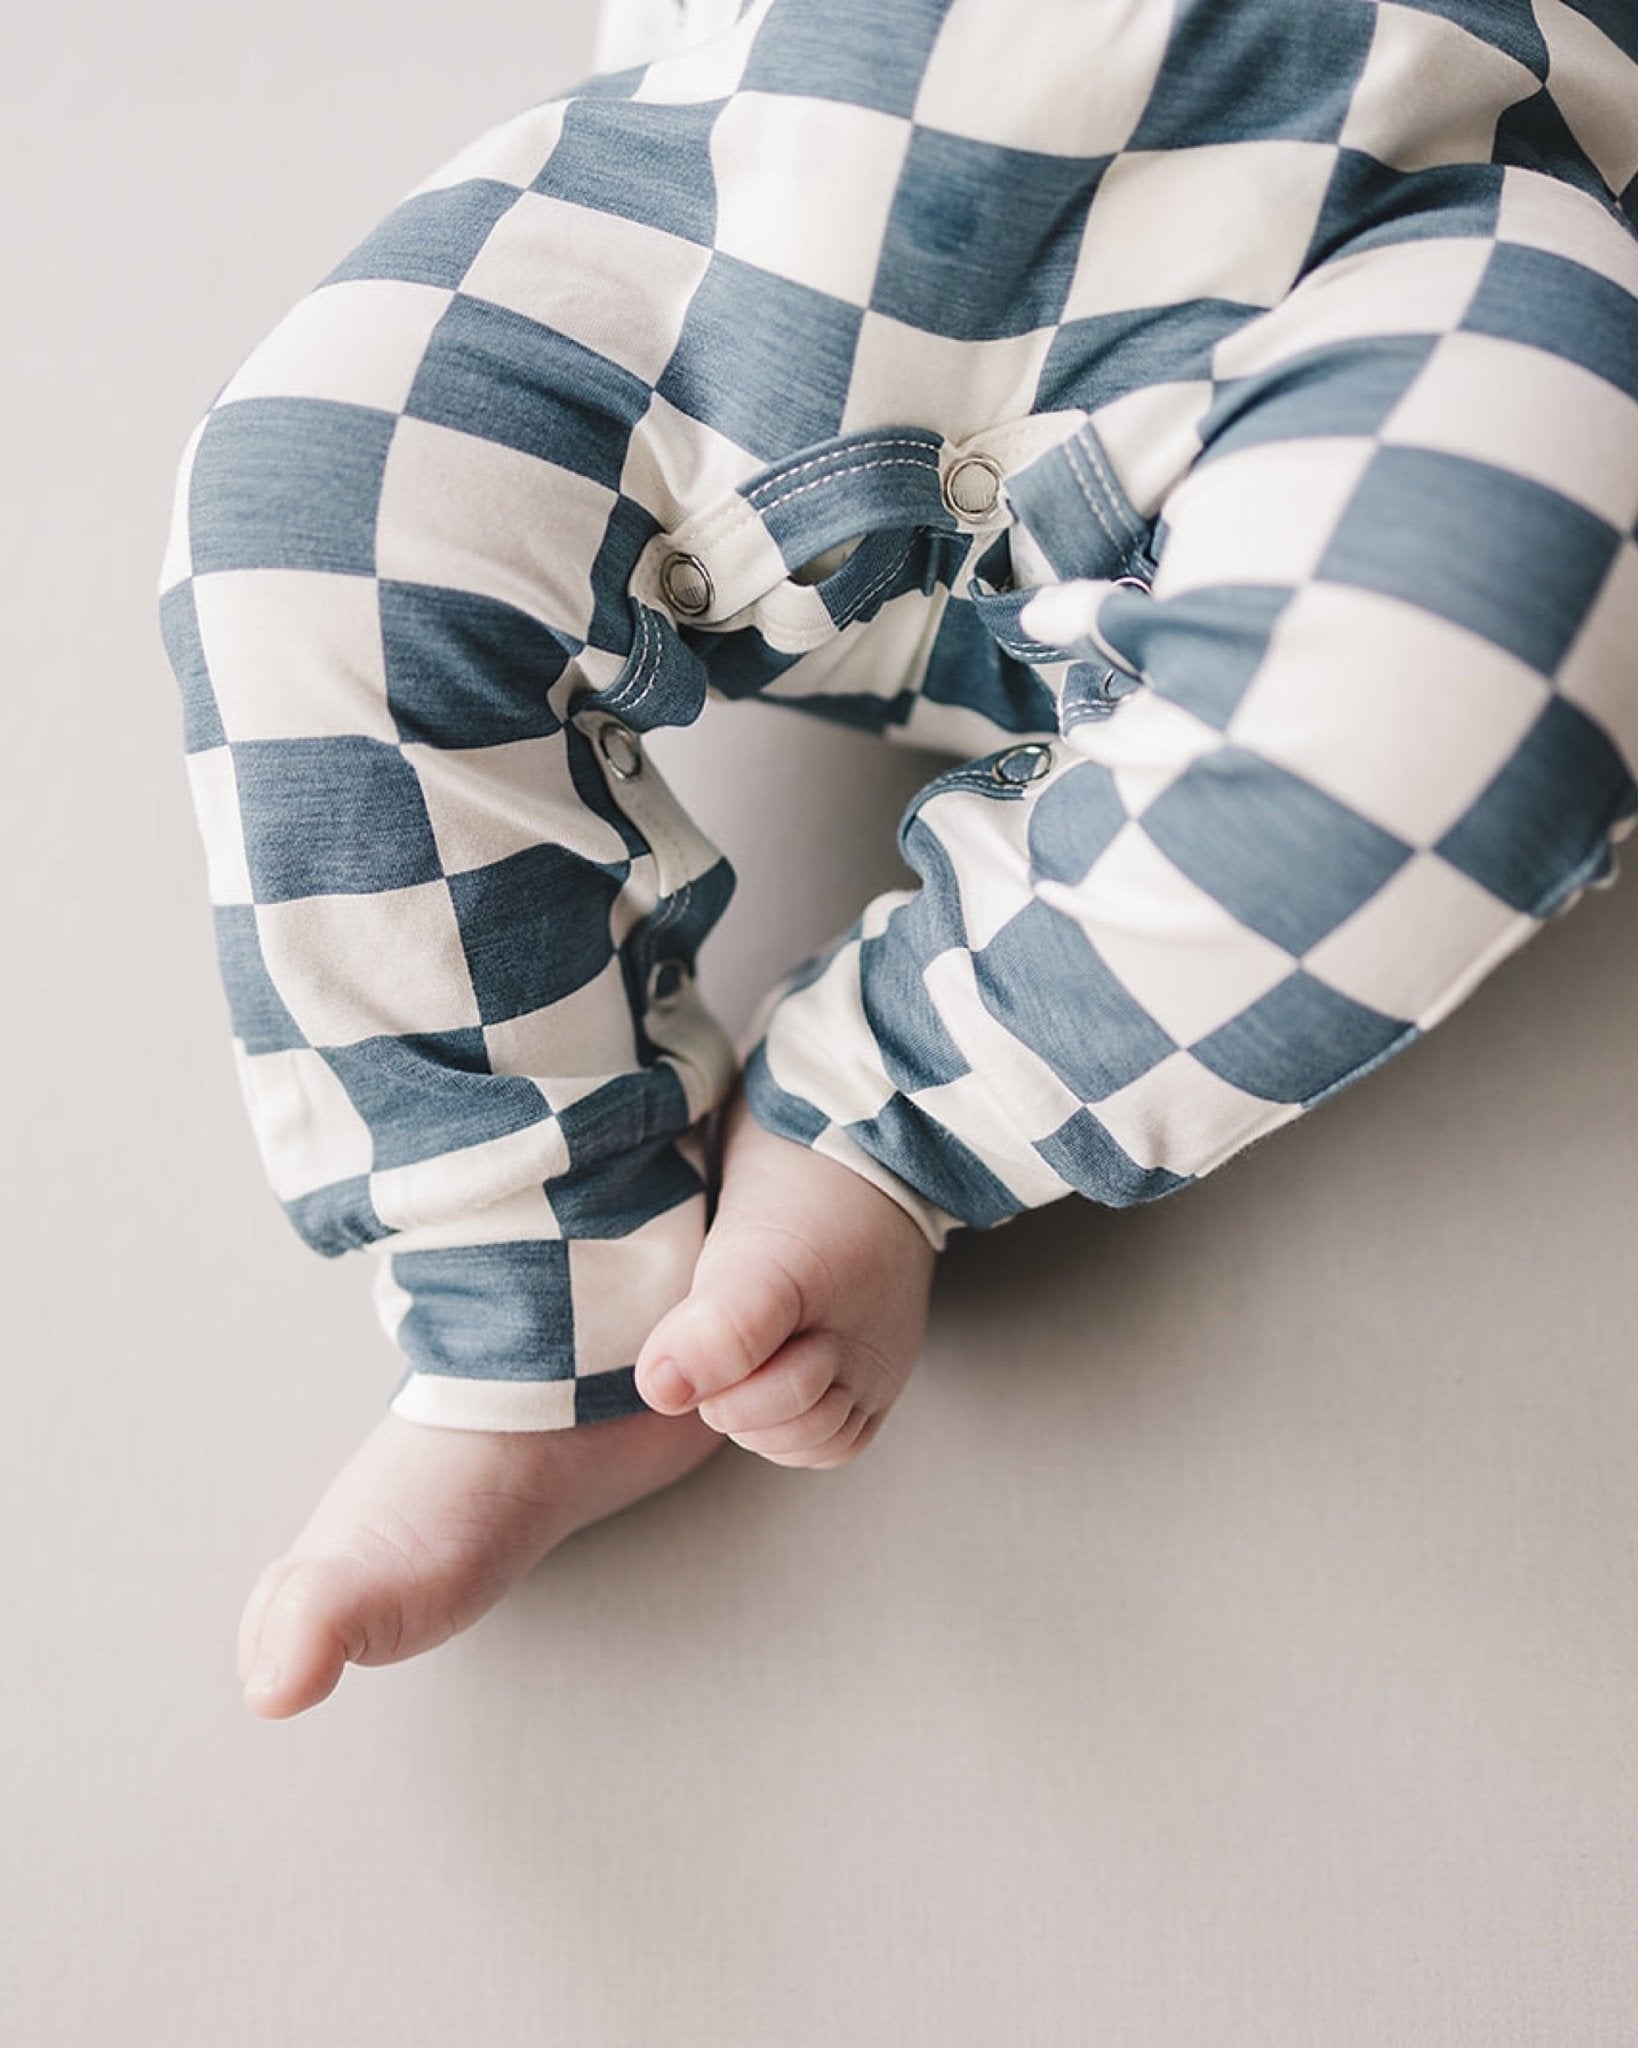 Bamboo Checkered Jumpsuit | Blue